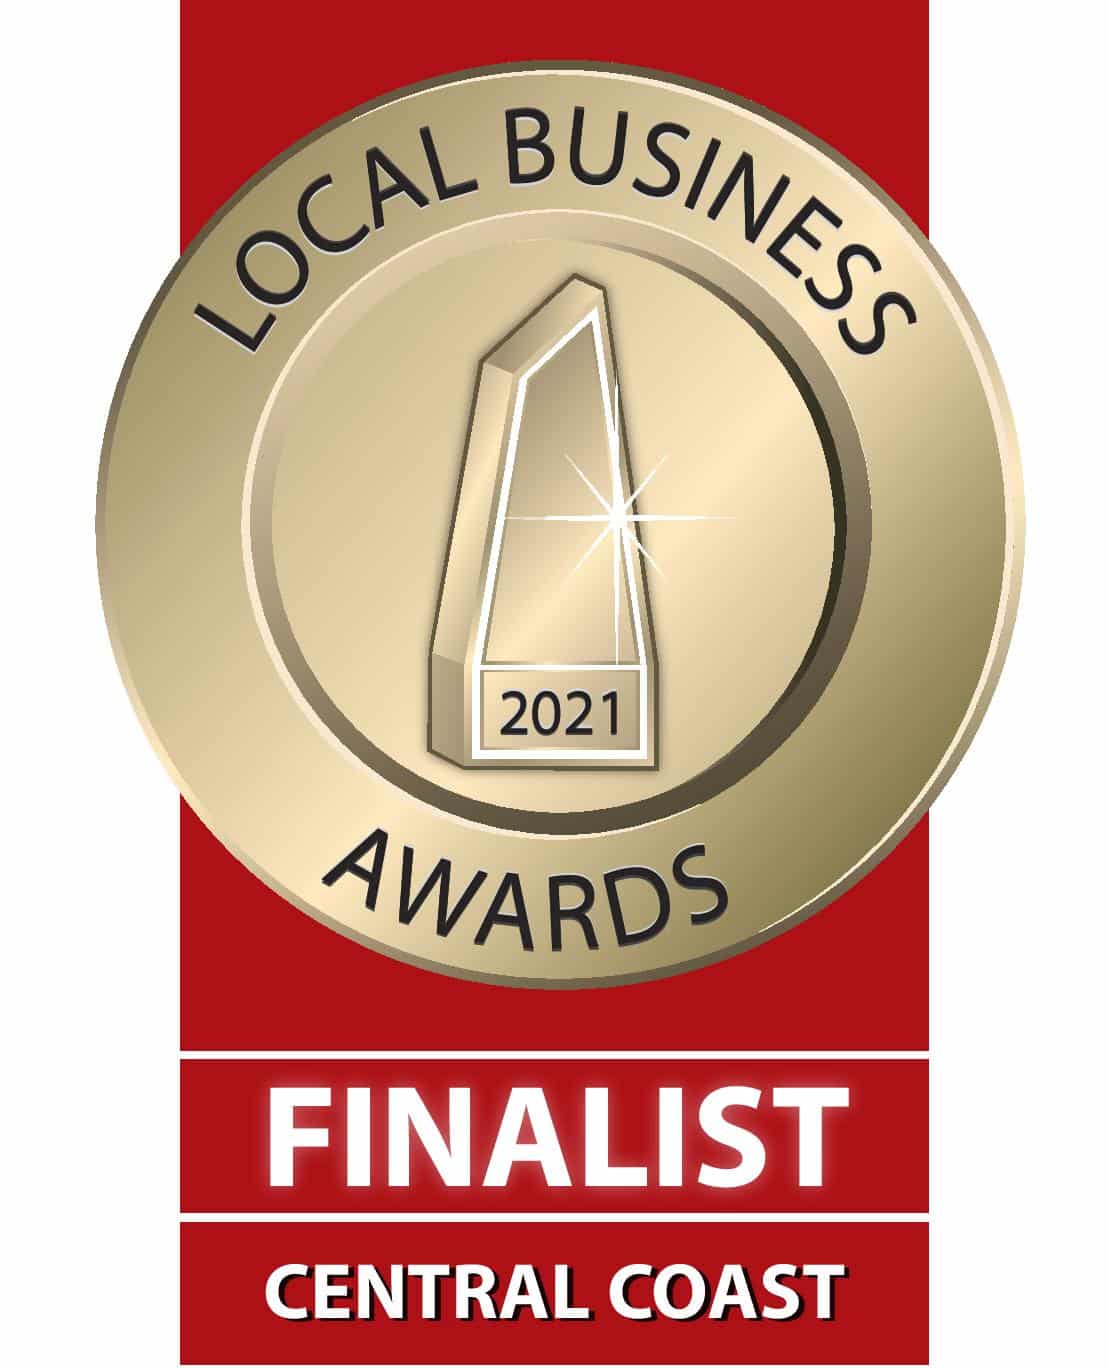 Local Business Awards - Central Coast Finalist